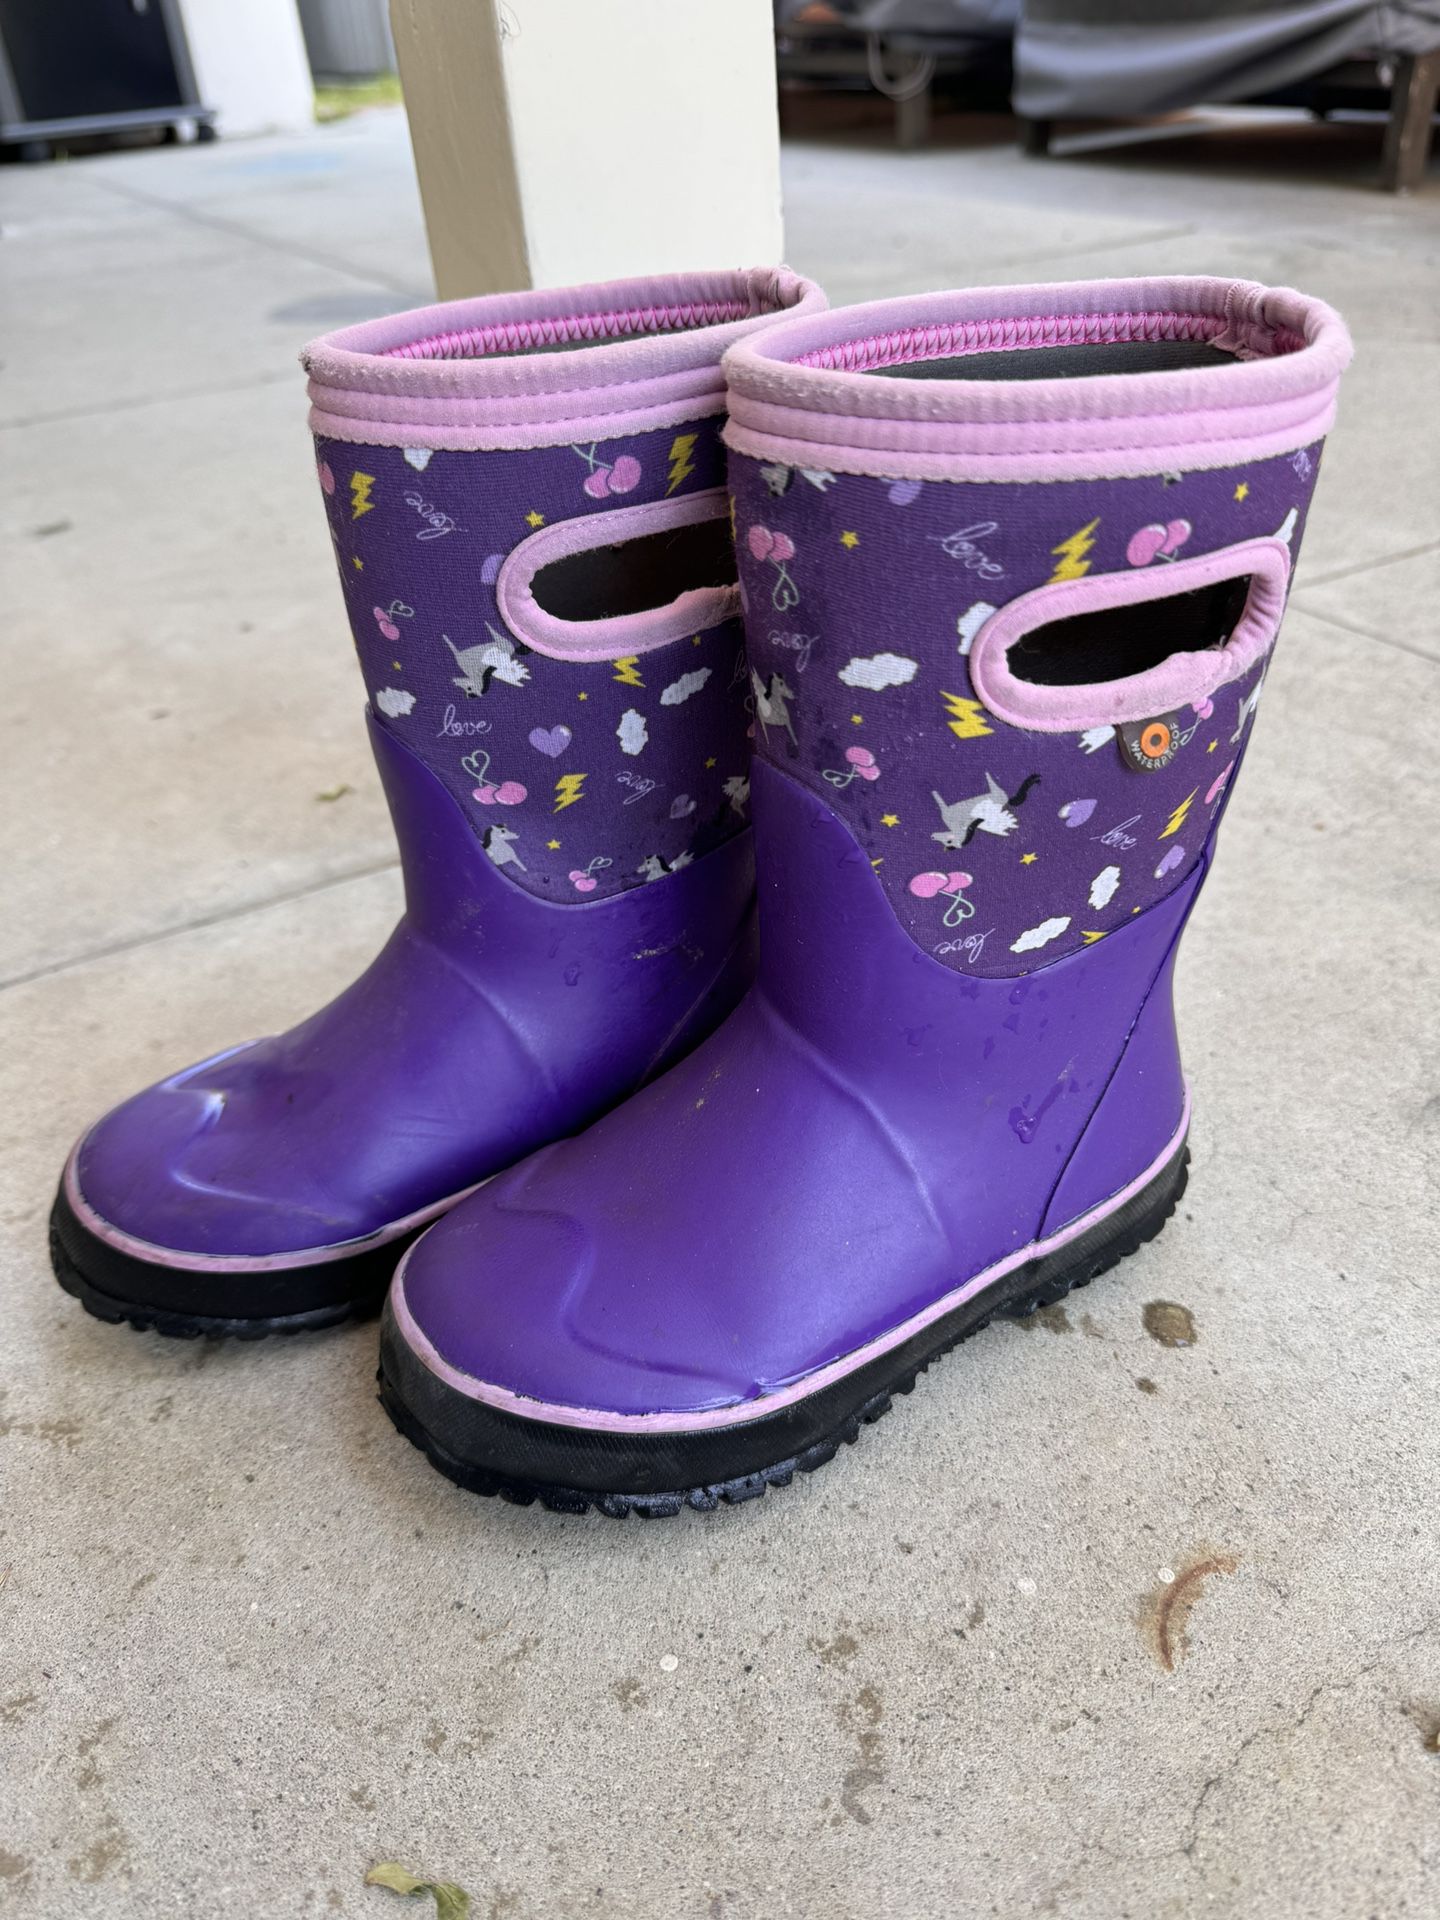 Boggs Girls Rain Boots Size 12